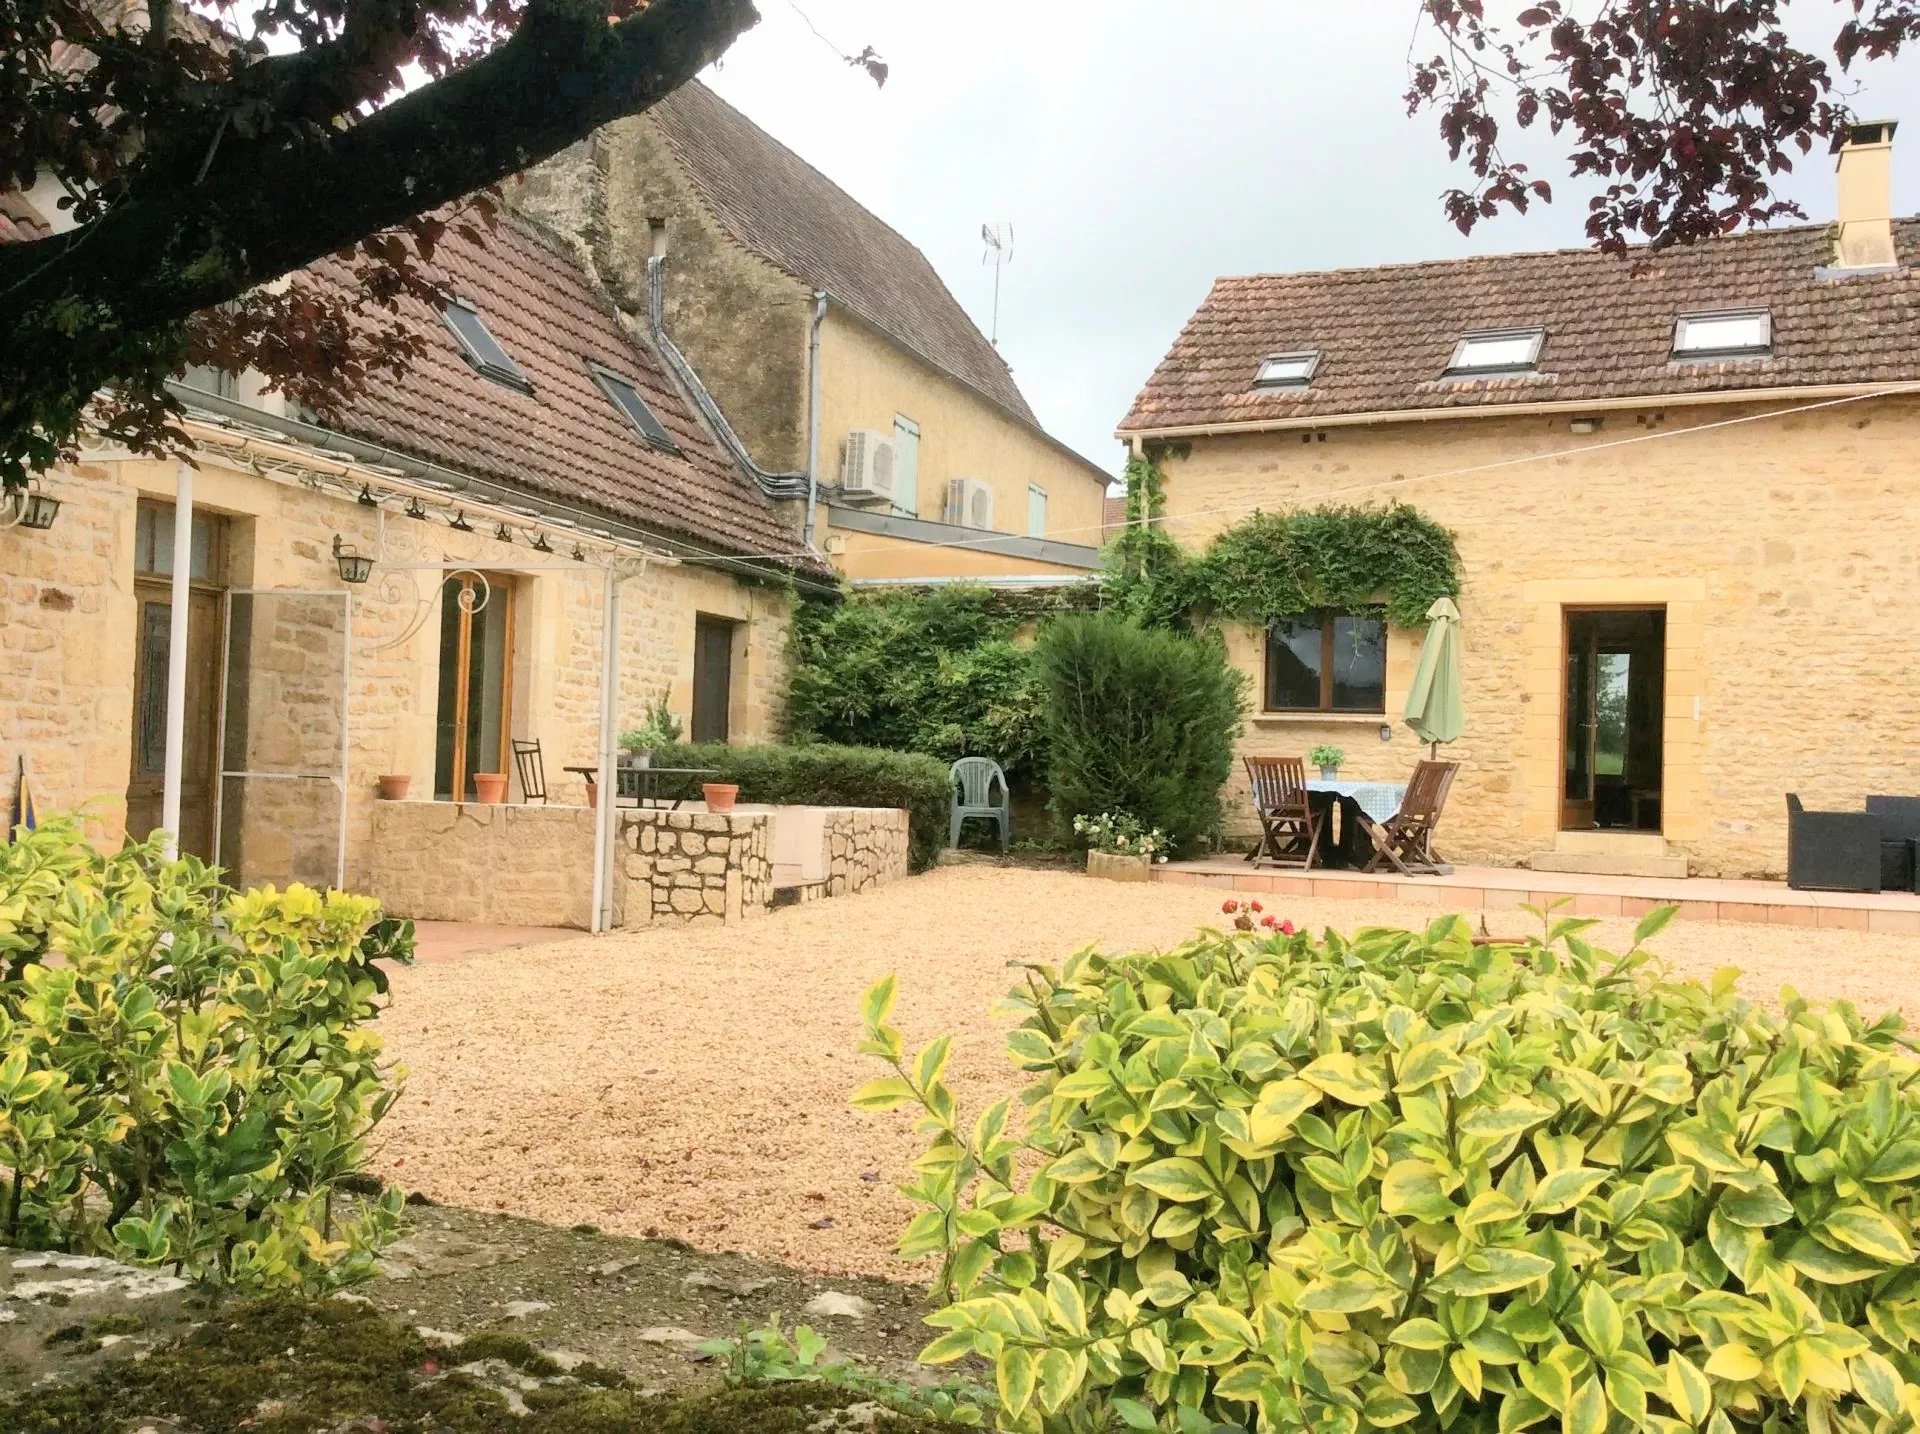 Perfectly located close to Sarlat and Montignac - ensemble of buildings with pool